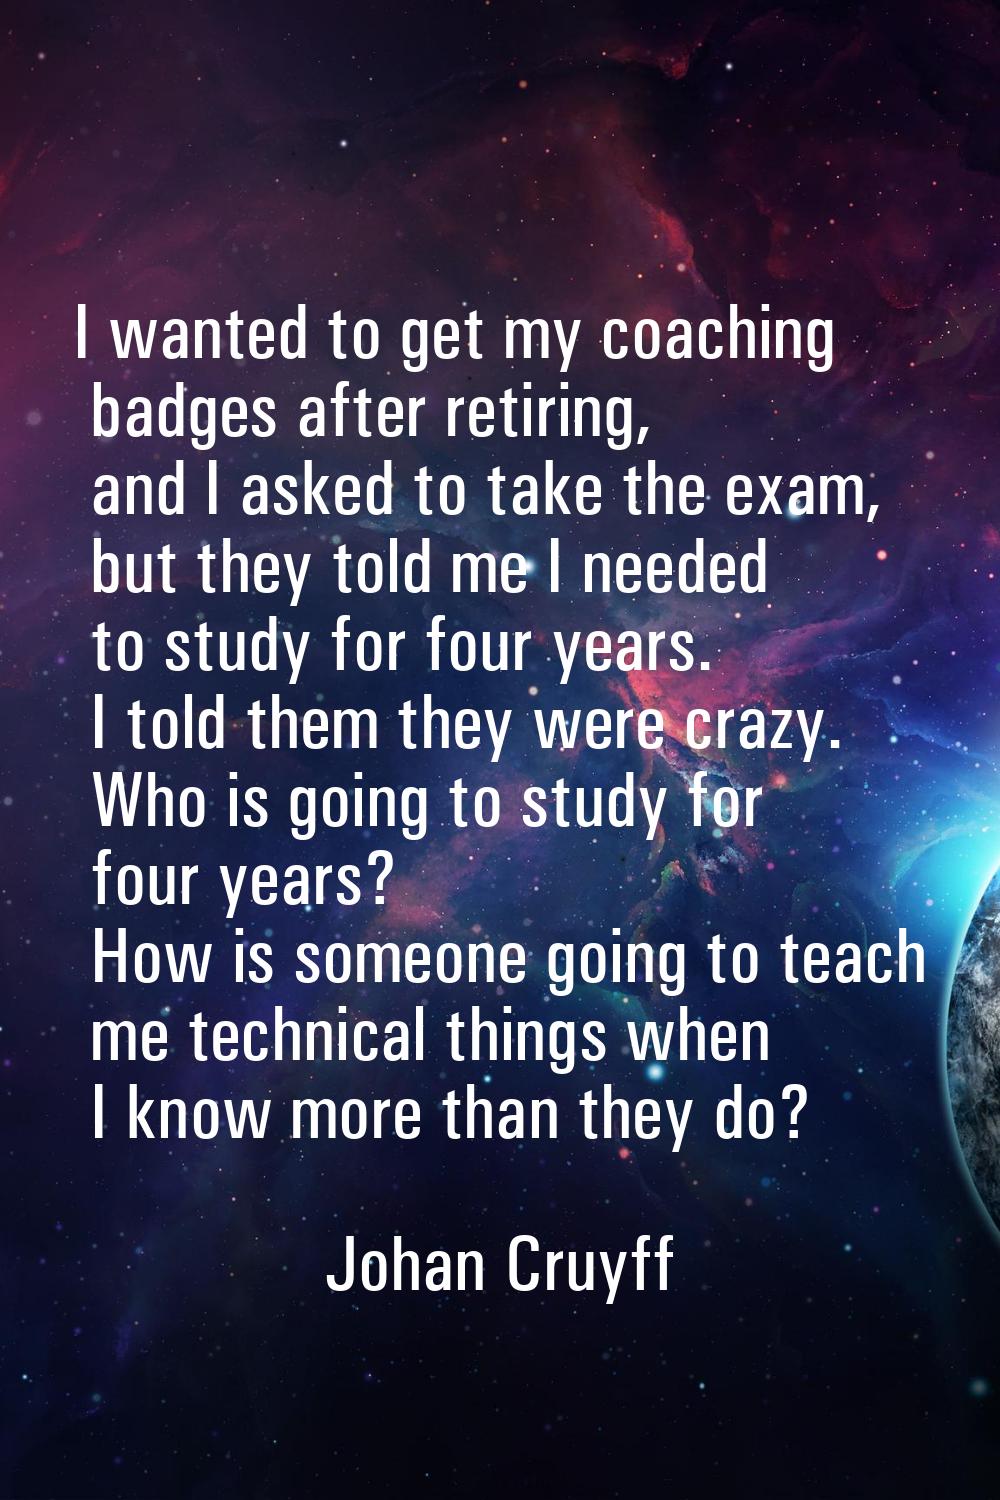 I wanted to get my coaching badges after retiring, and I asked to take the exam, but they told me I